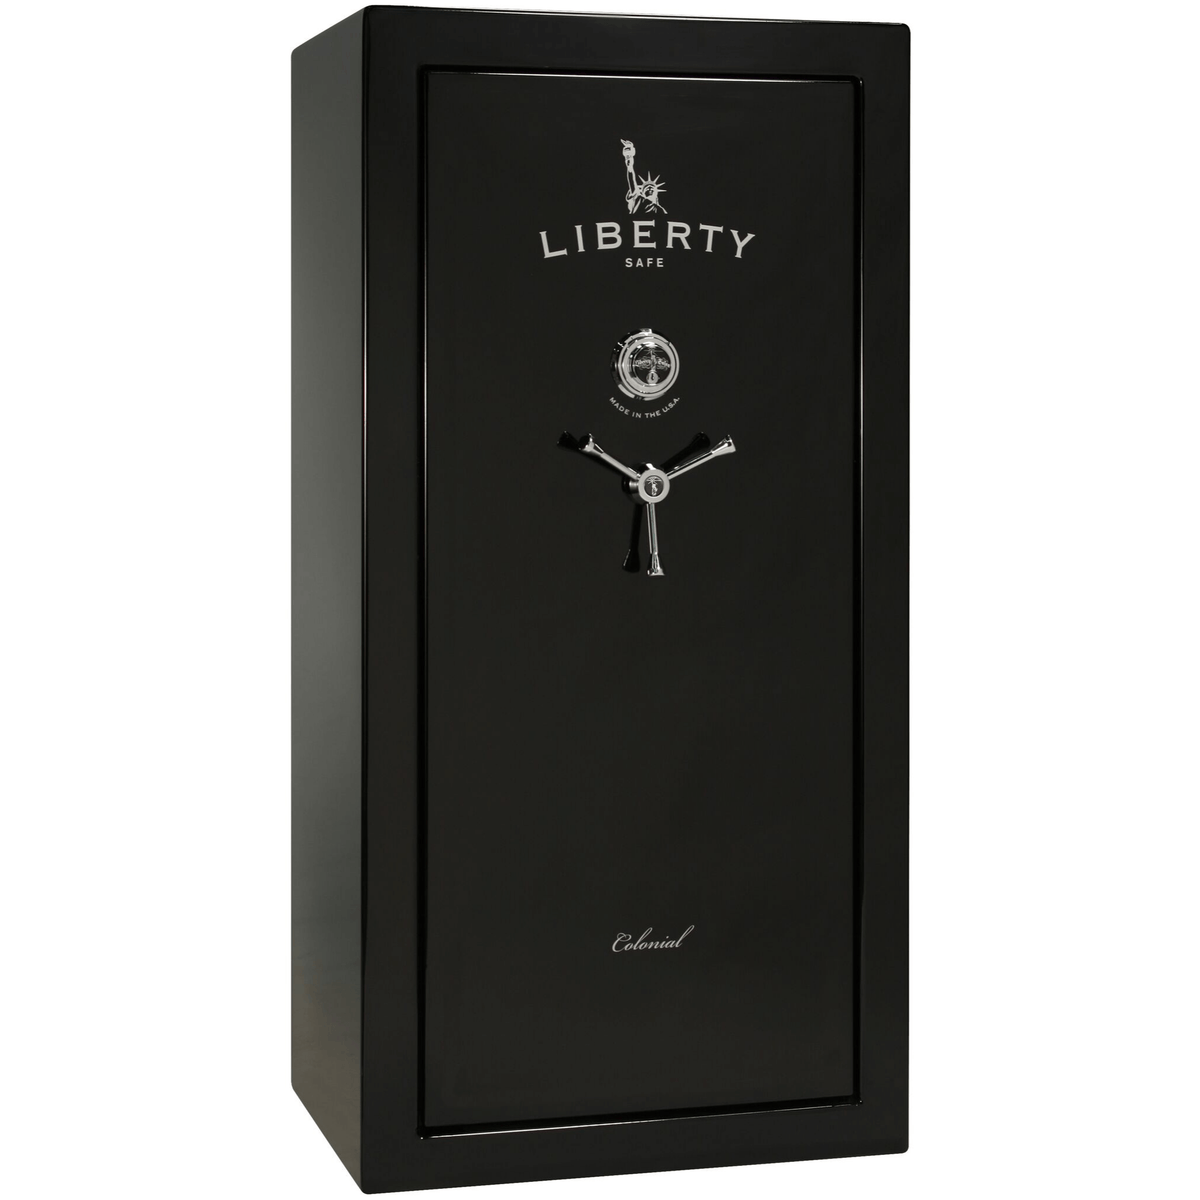 Liberty Colonial 23 Safe in Black Gloss with Chrome Mechanical Lock.